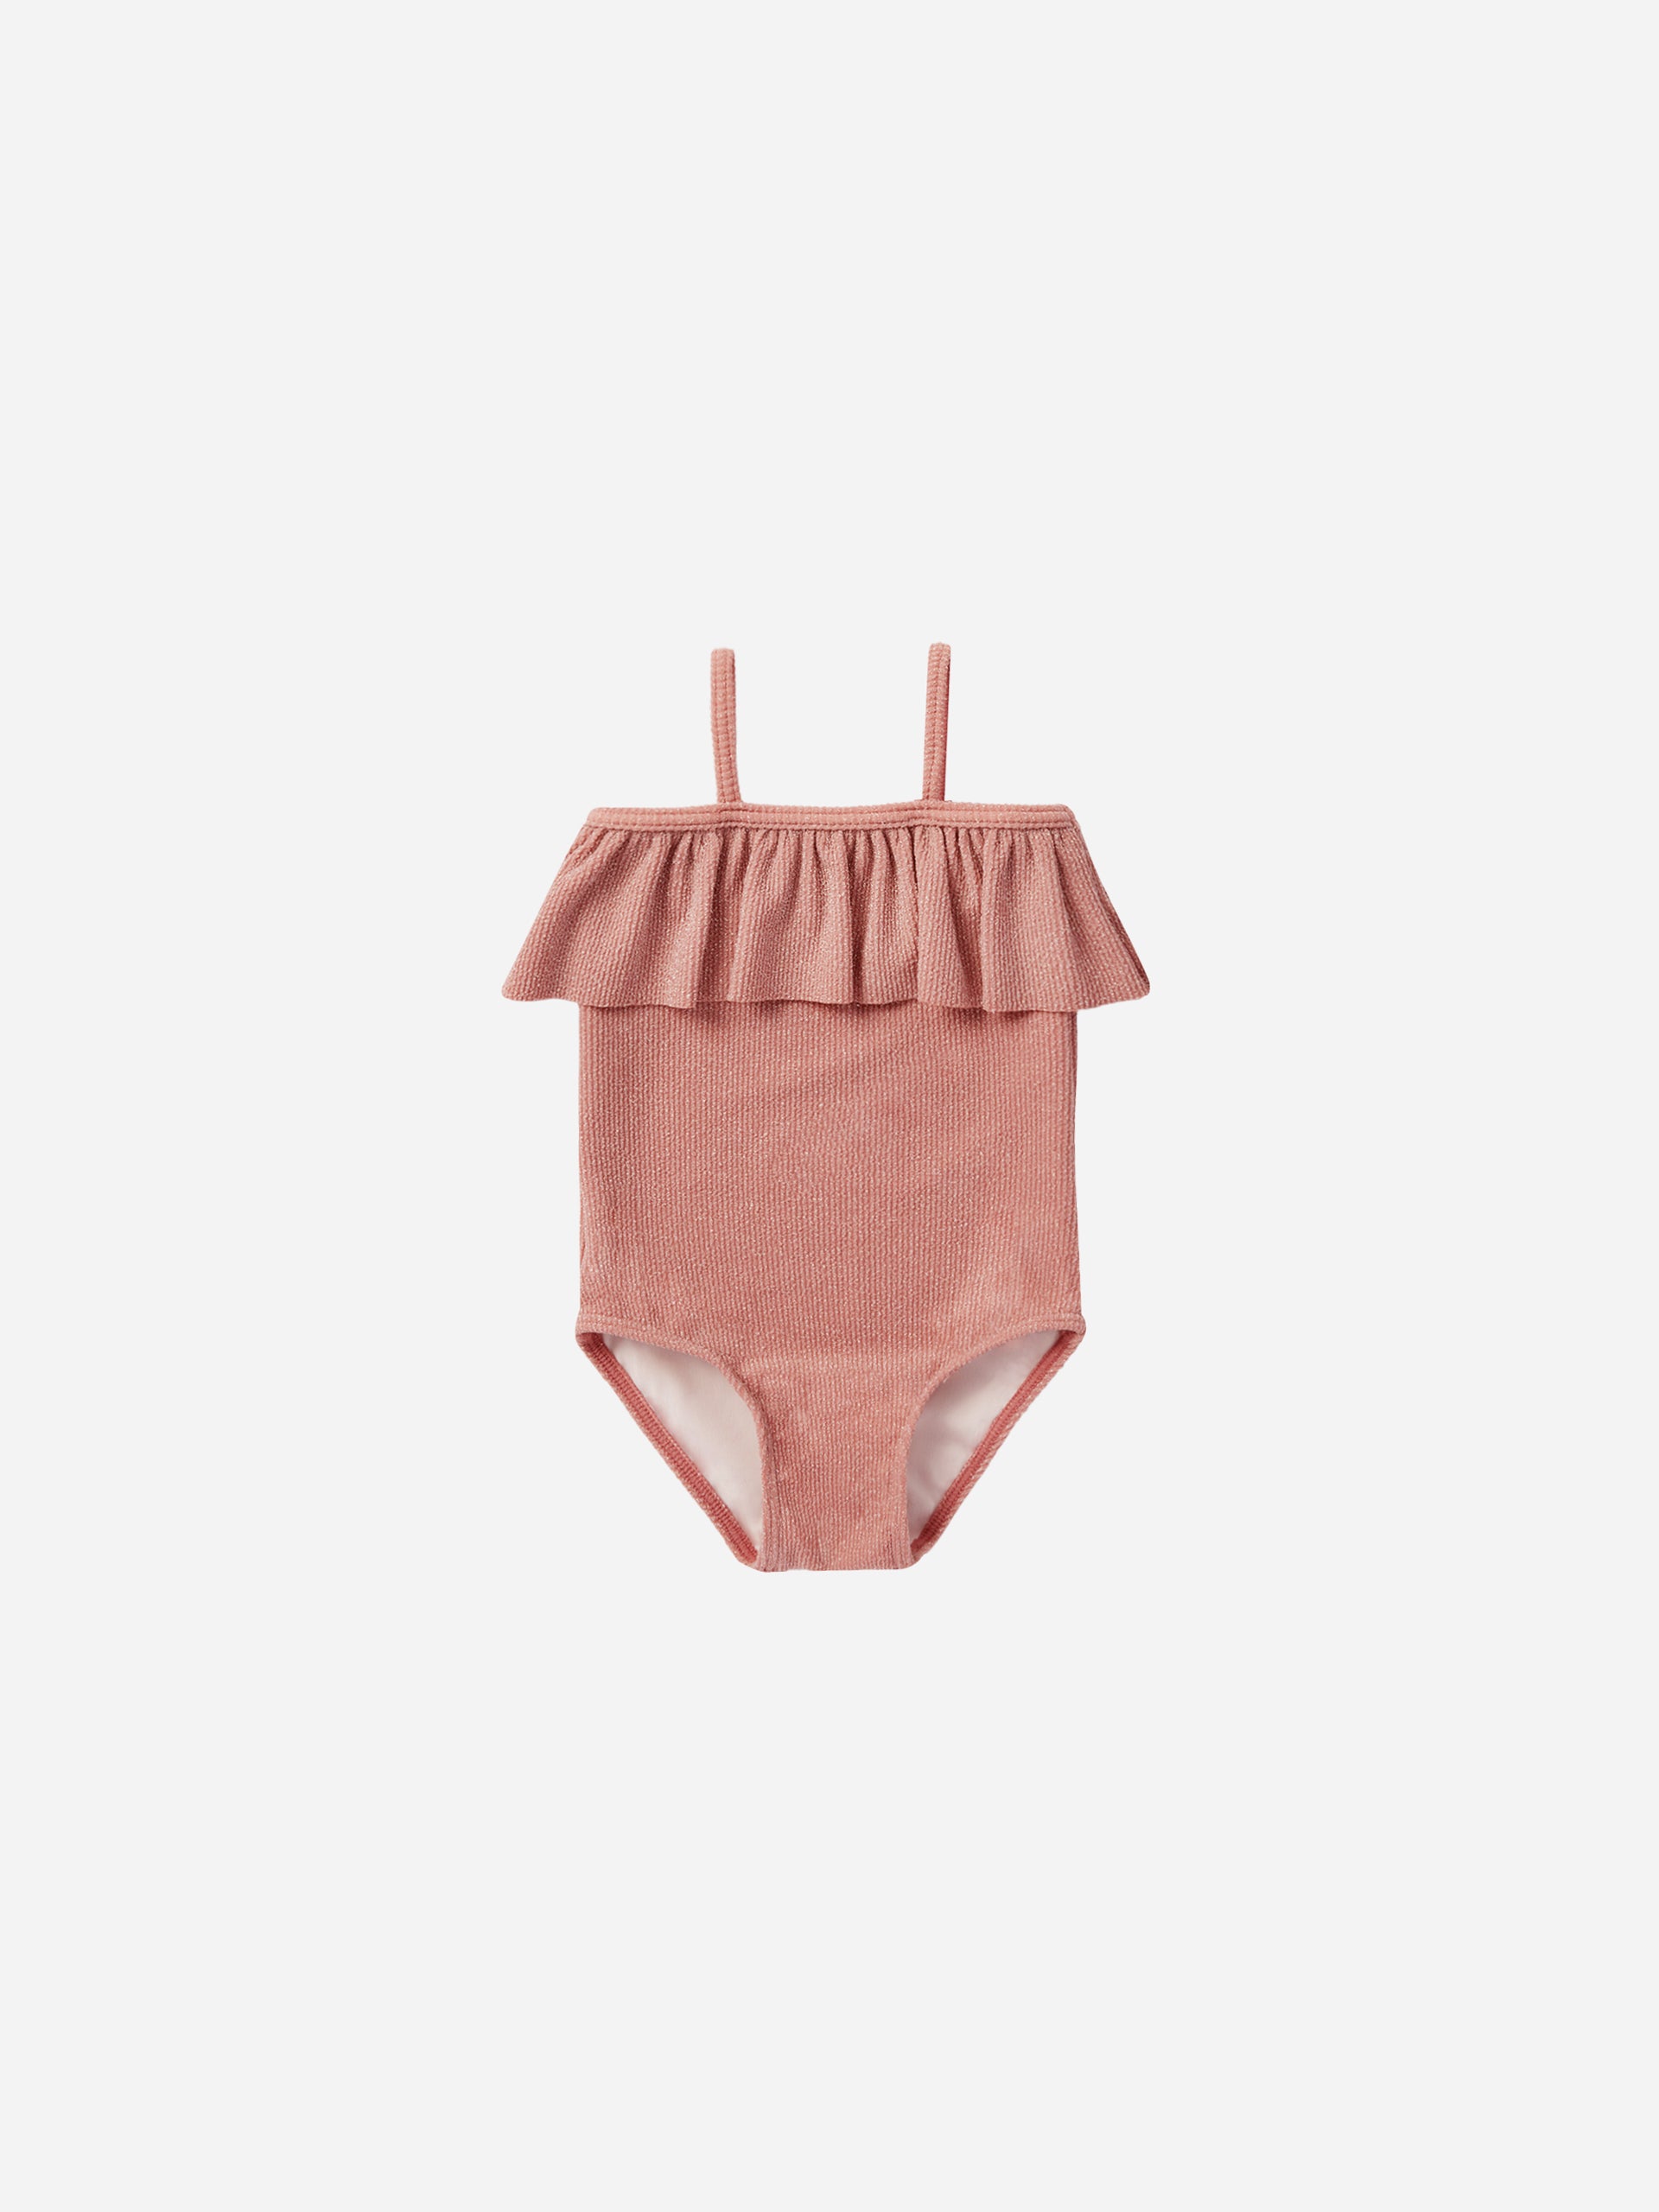 Ruffle One-Piece || Lipstick - Rylee + Cru | Kids Clothes | Trendy Baby Clothes | Modern Infant Outfits |